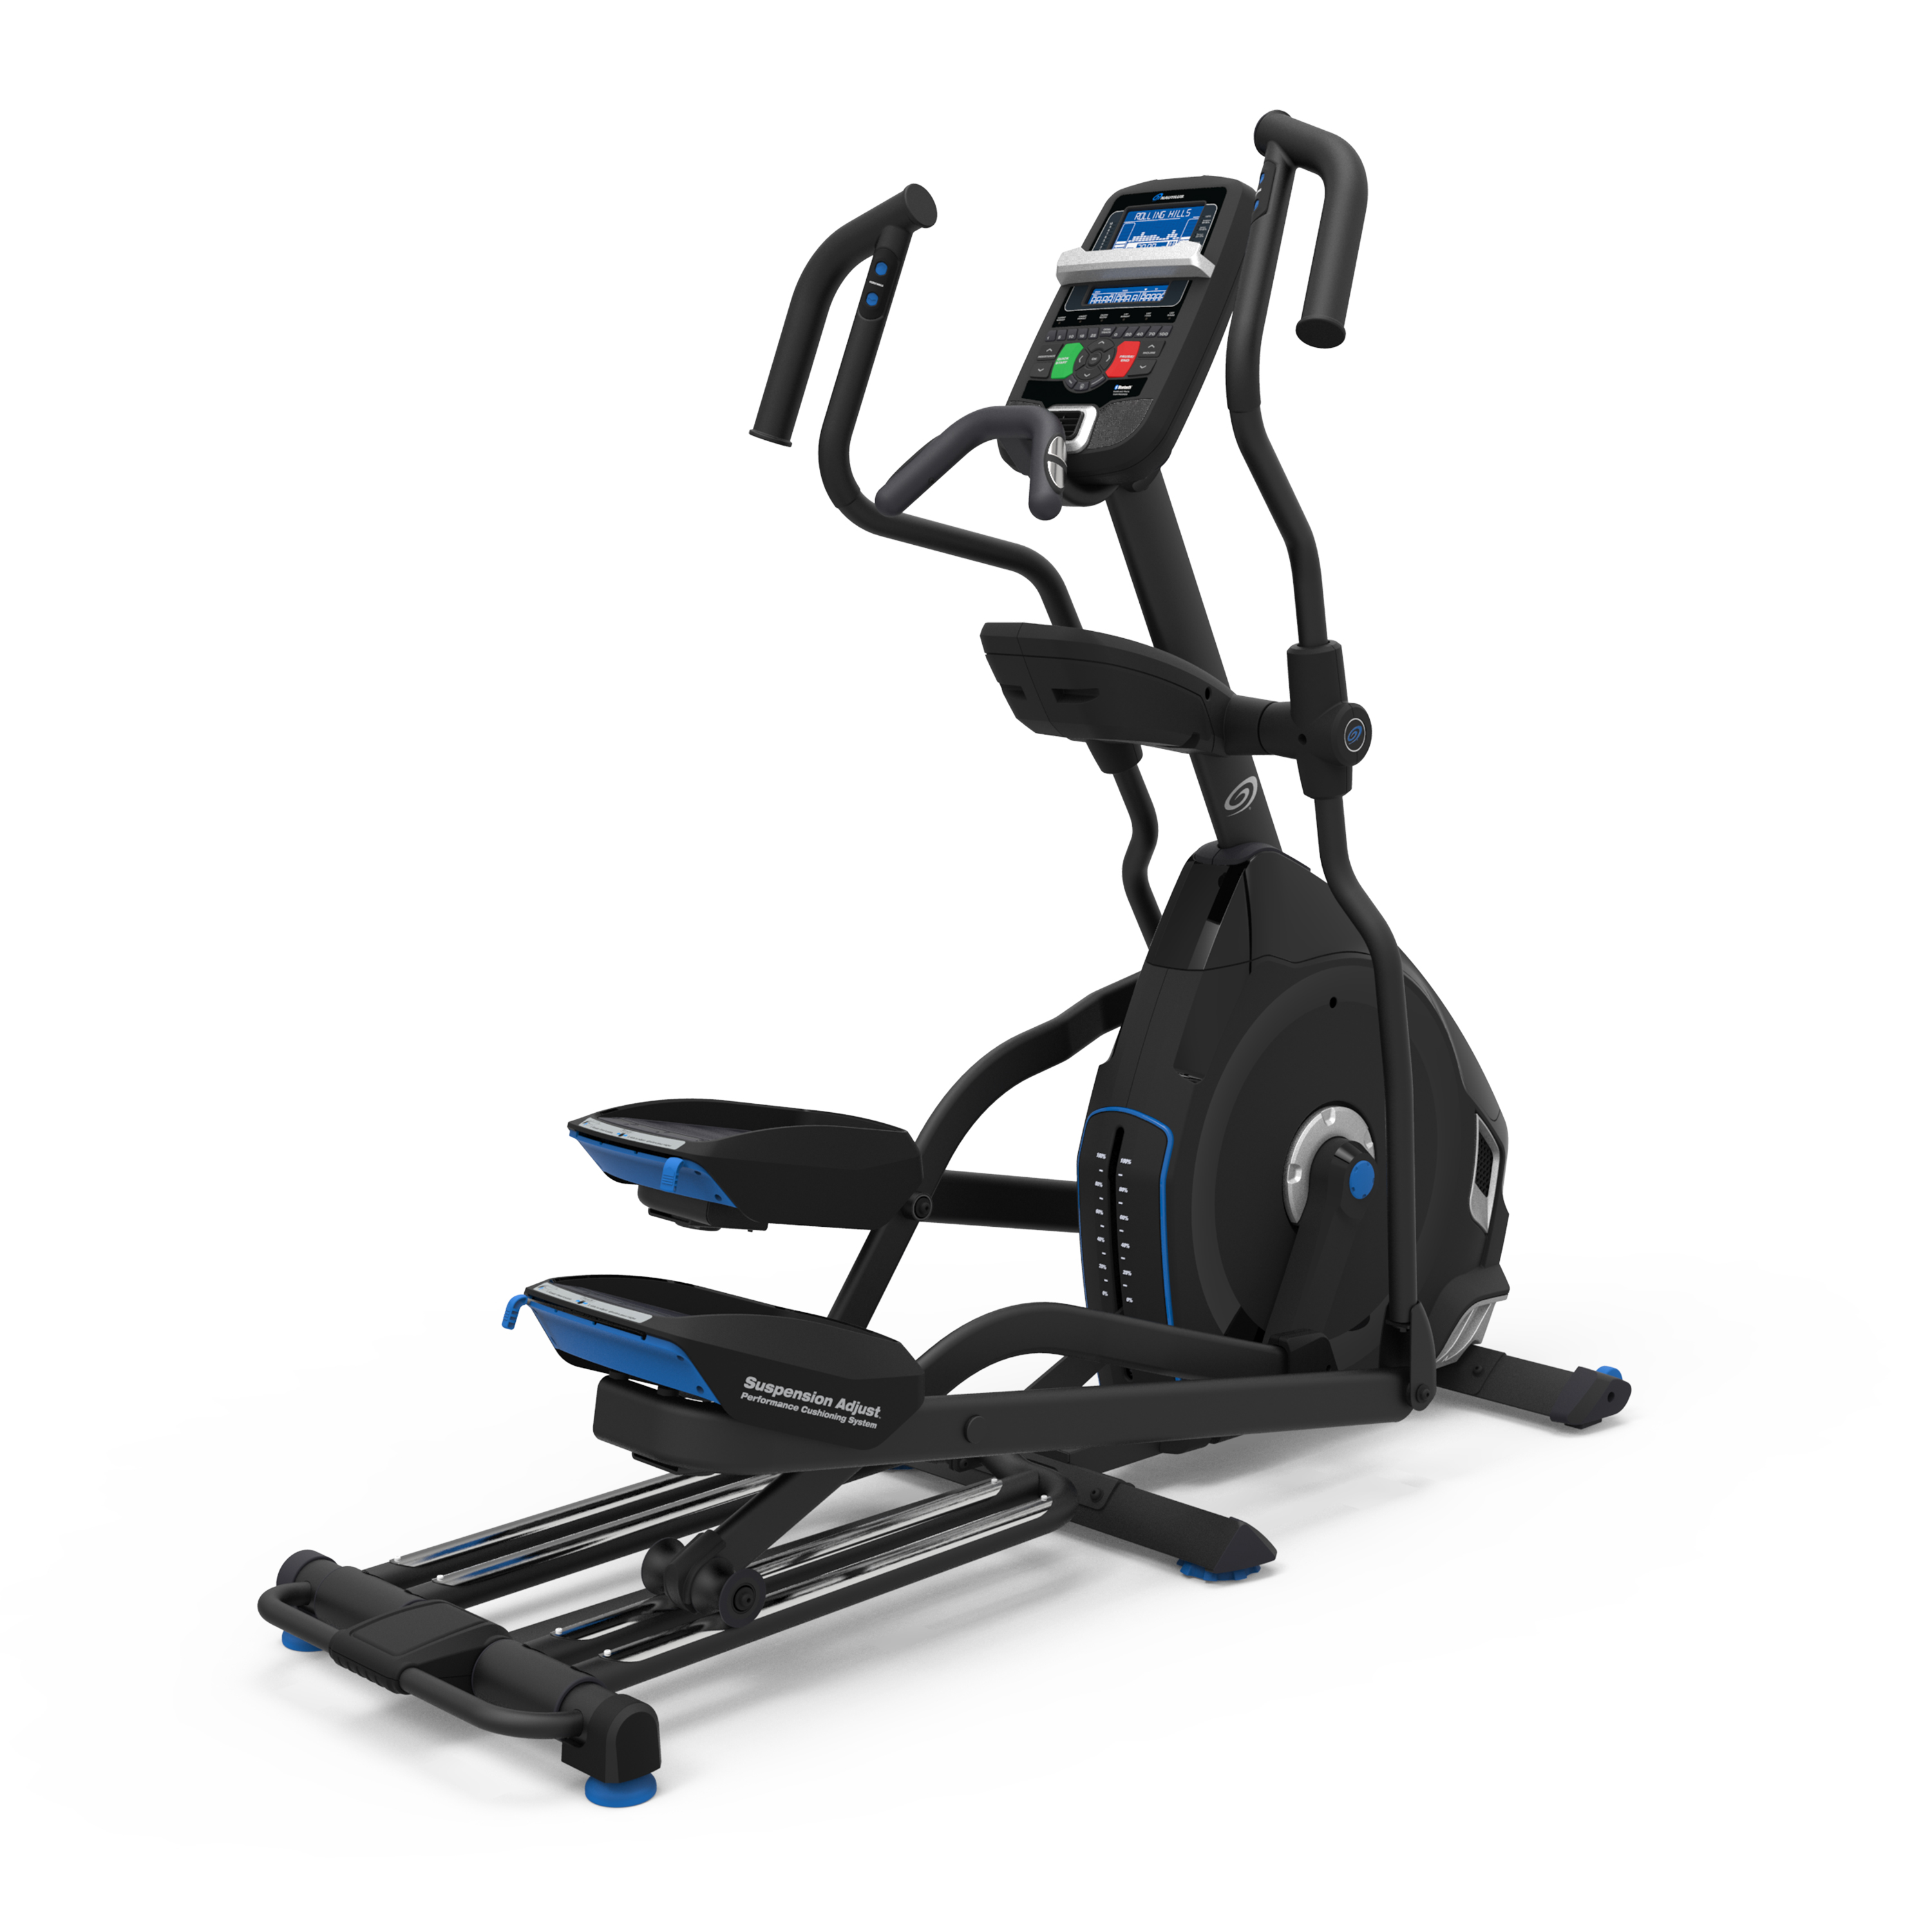 Nautilus E618 Performance Series Home and Gym Workout Cardio Elliptical Trainer - image 3 of 11